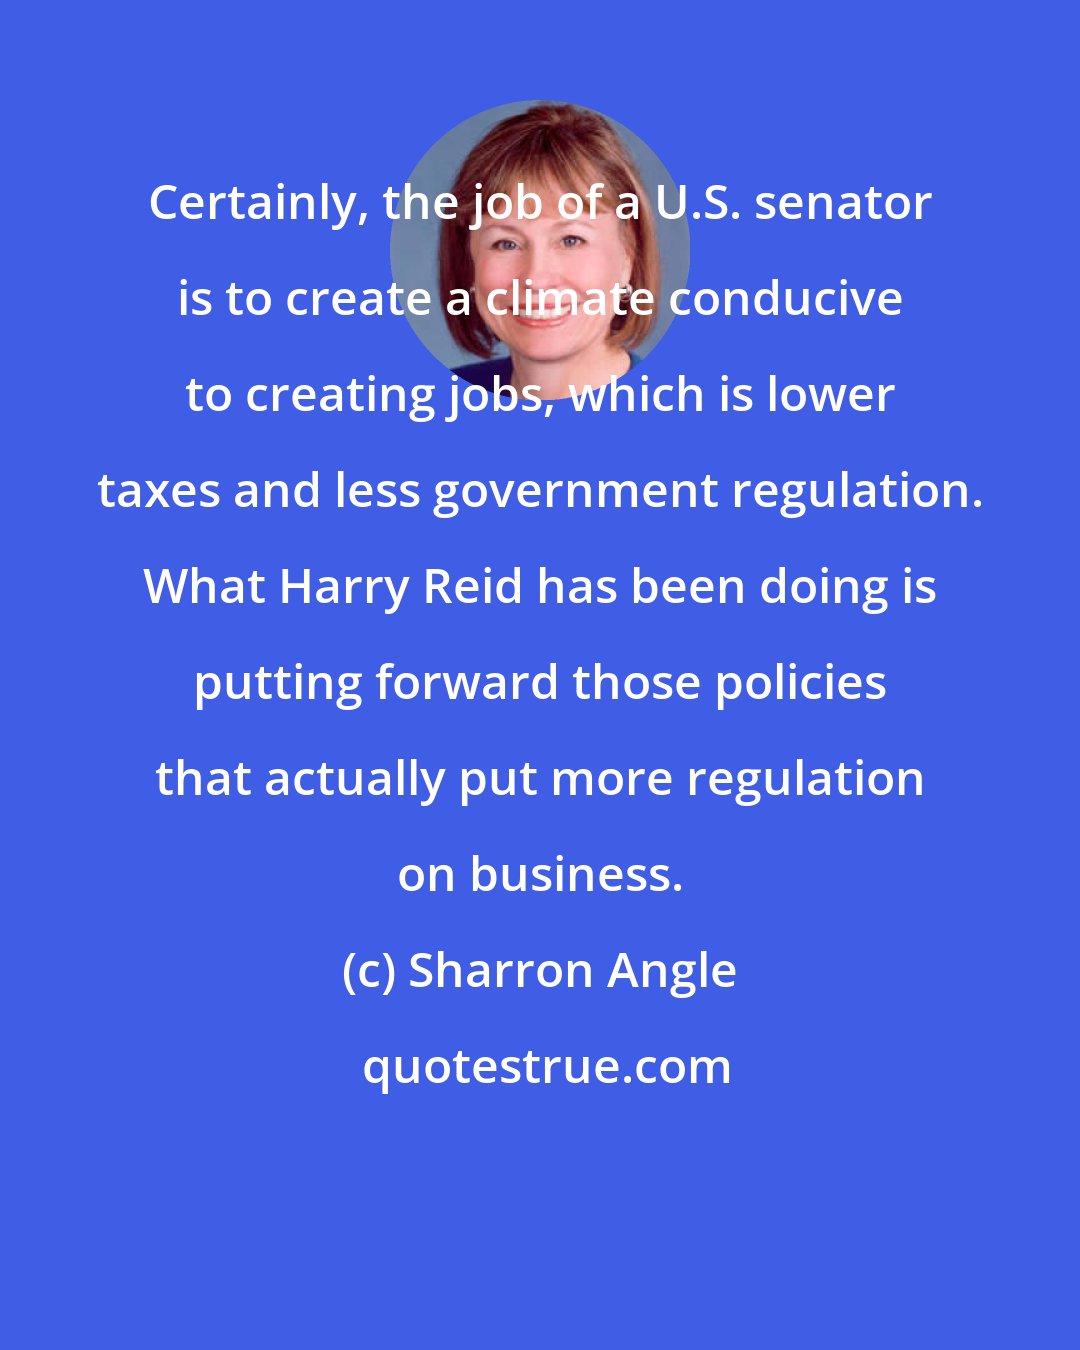 Sharron Angle: Certainly, the job of a U.S. senator is to create a climate conducive to creating jobs, which is lower taxes and less government regulation. What Harry Reid has been doing is putting forward those policies that actually put more regulation on business.